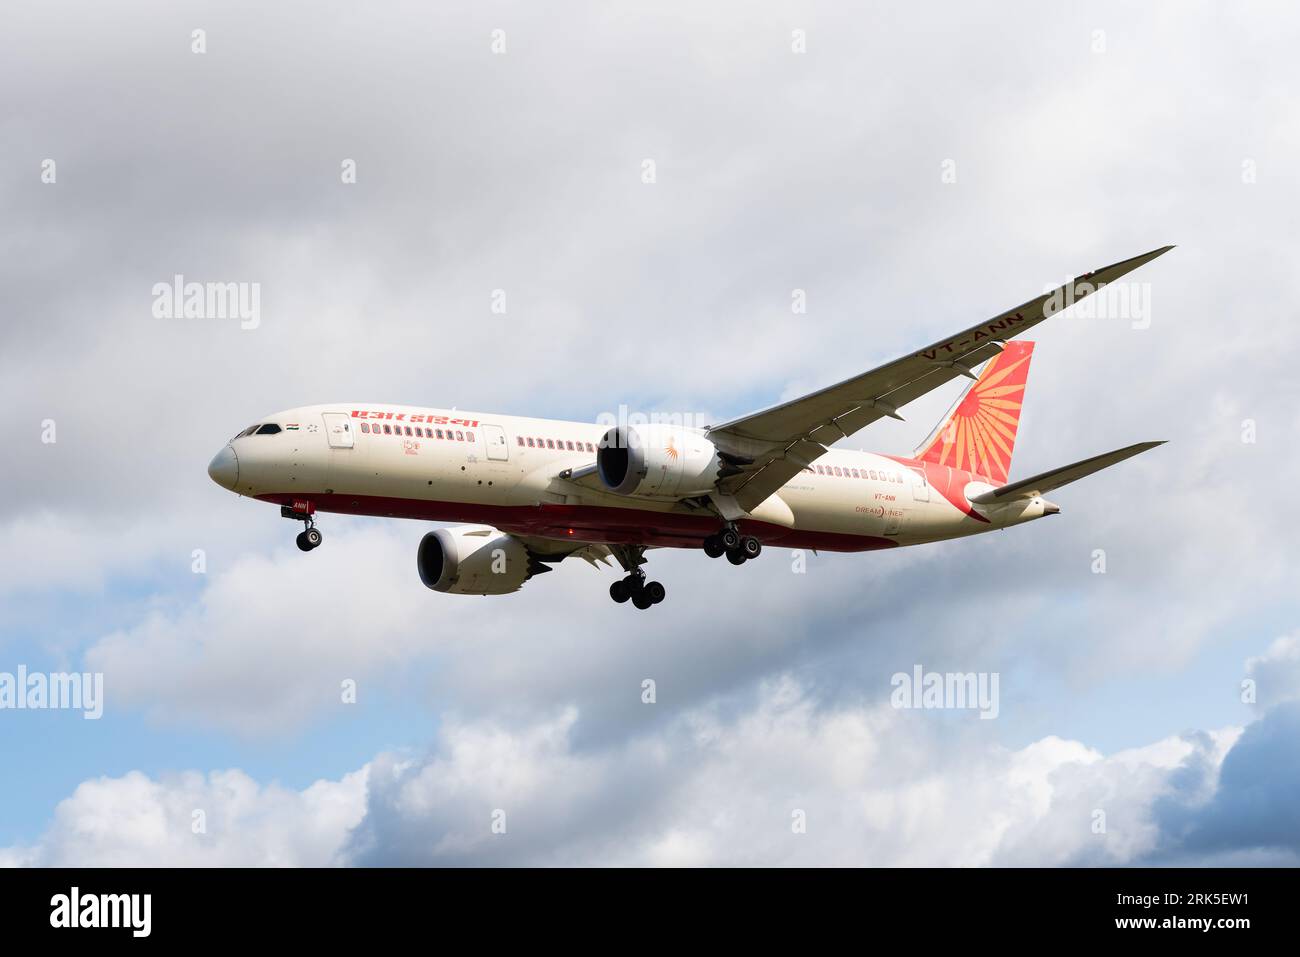 Air India Boeing 787-8 Dreamliner jet airliner plane VT-ANN on finals to land at London Heathrow Airport, UK. Air India Limited (Tata Group) airline Stock Photo